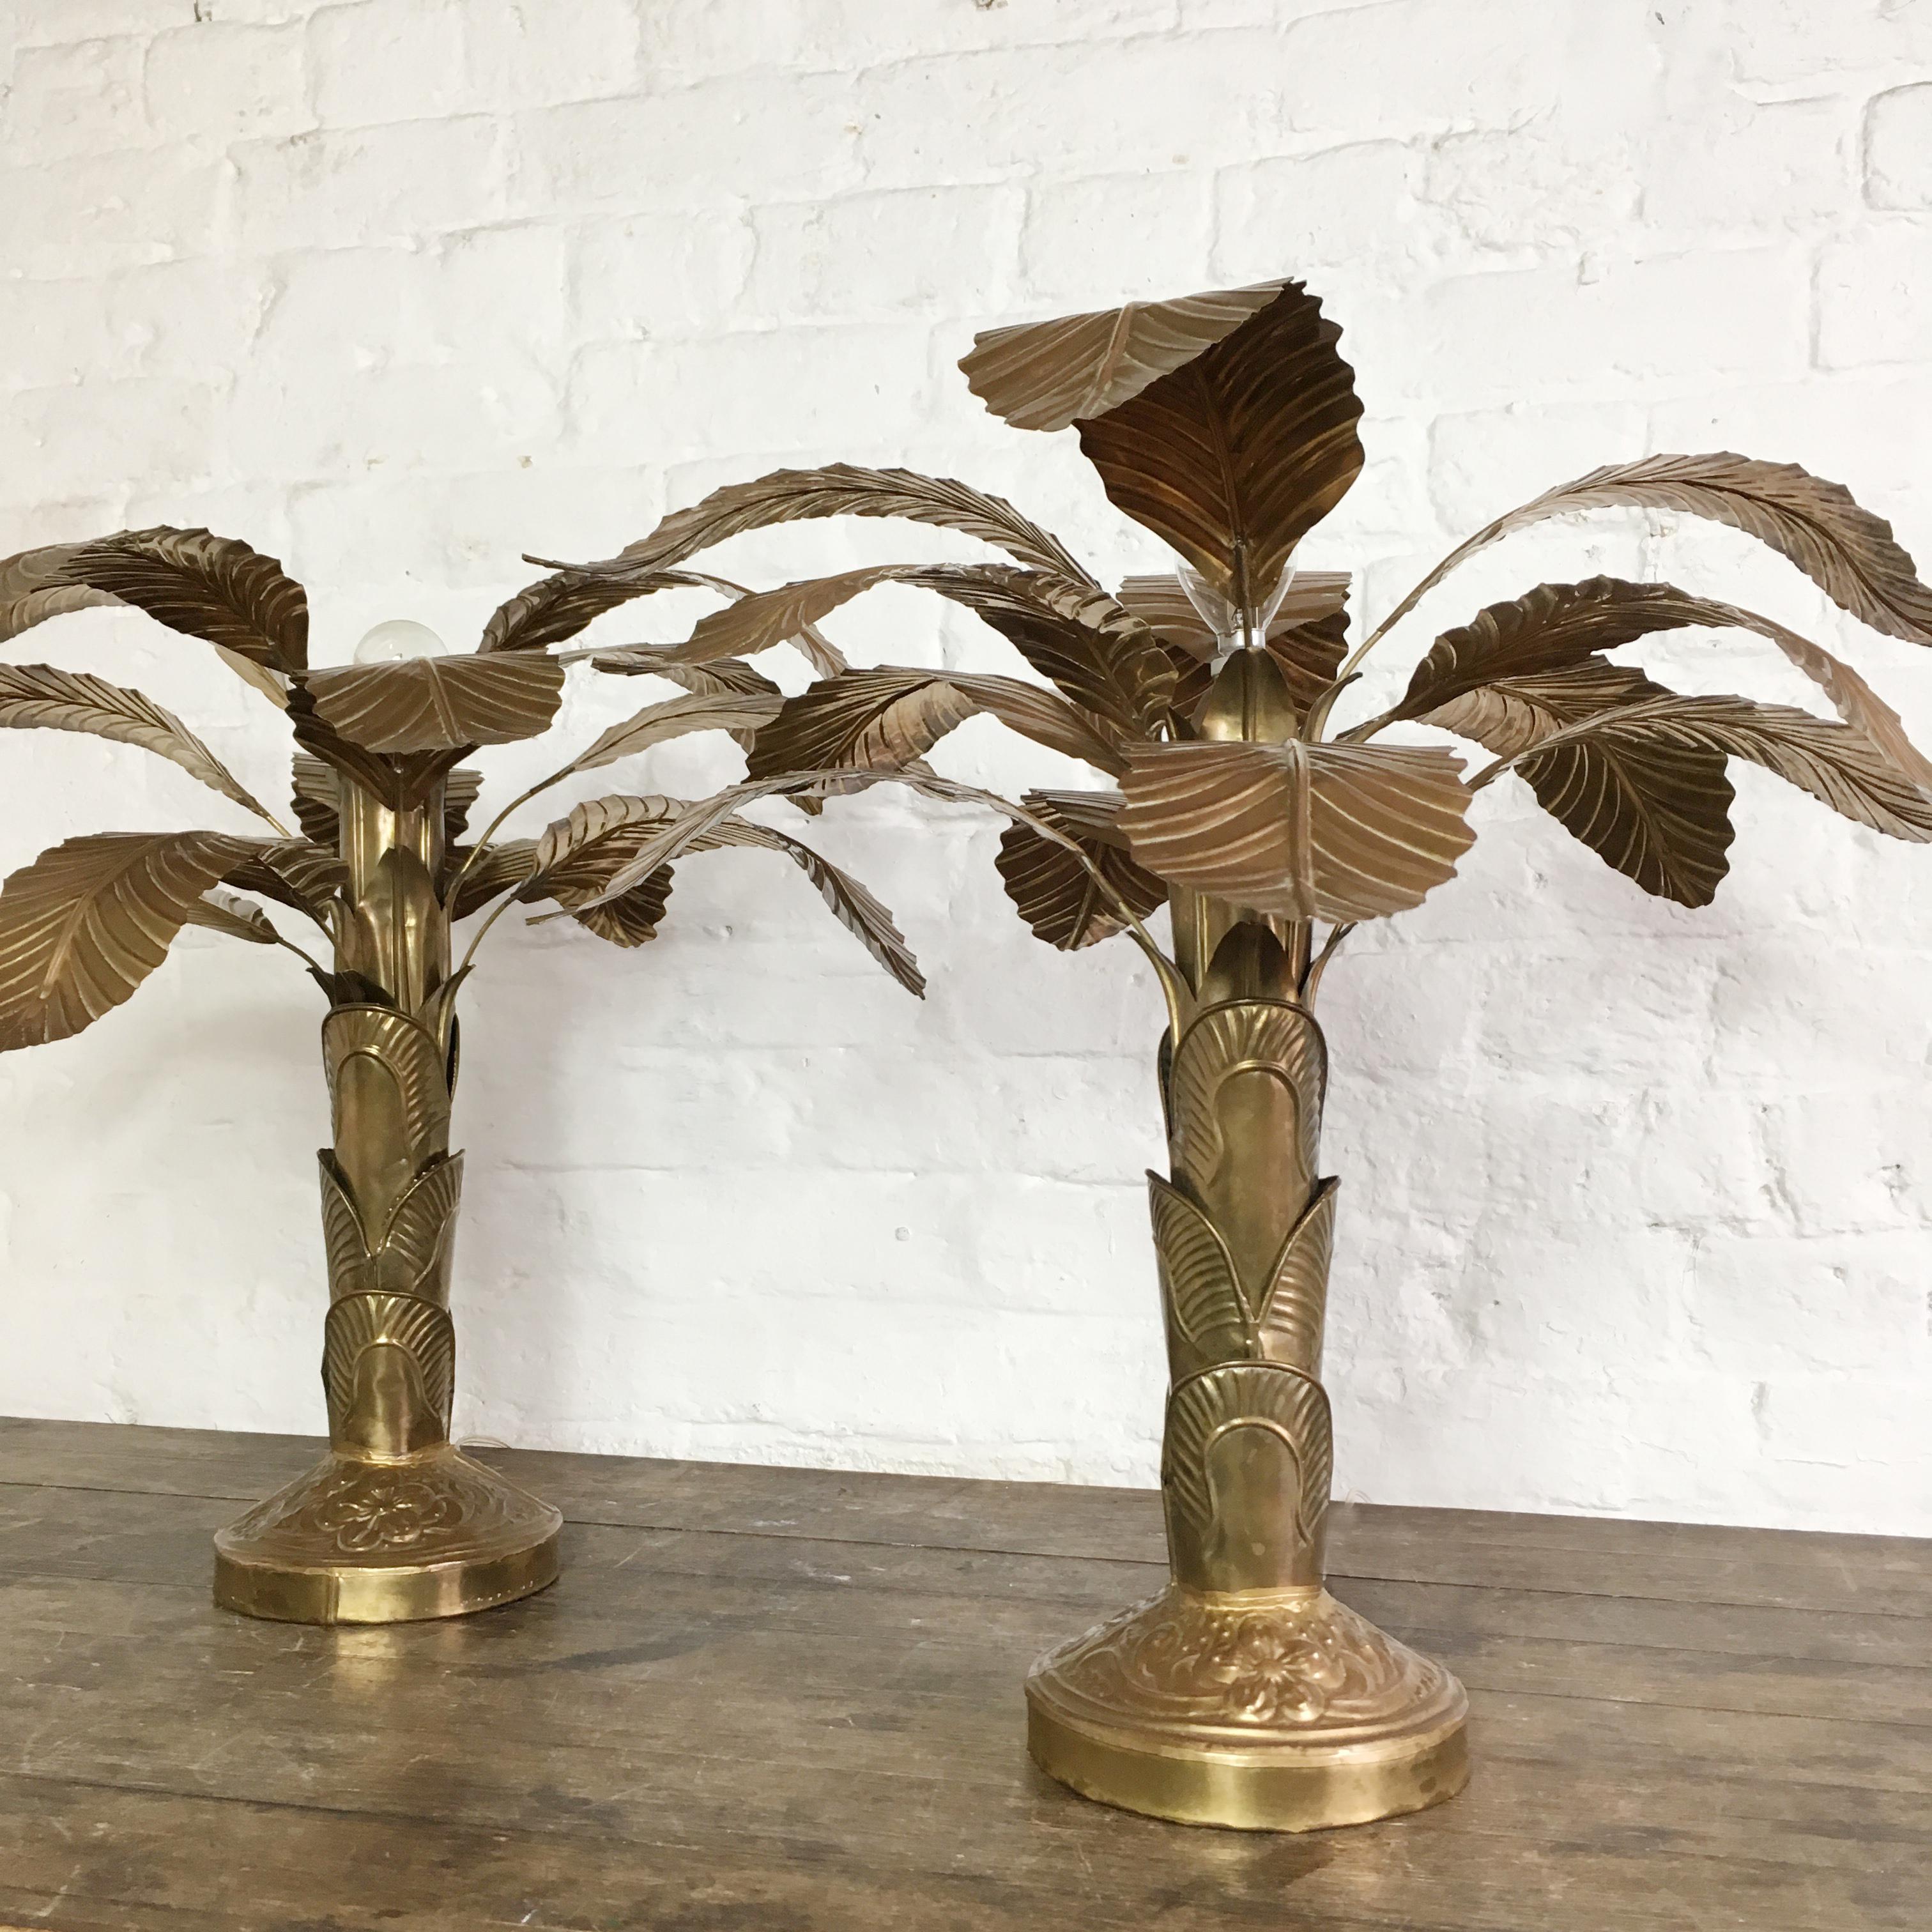 A matching pair of brass banana palm tree table lamps,
circa 1960s-1970s
Each lamp is fully handcrafted, the stems and base are hand stamped and embossed with the design, the leaves are hand crafted with much detail.
The leaves are fully